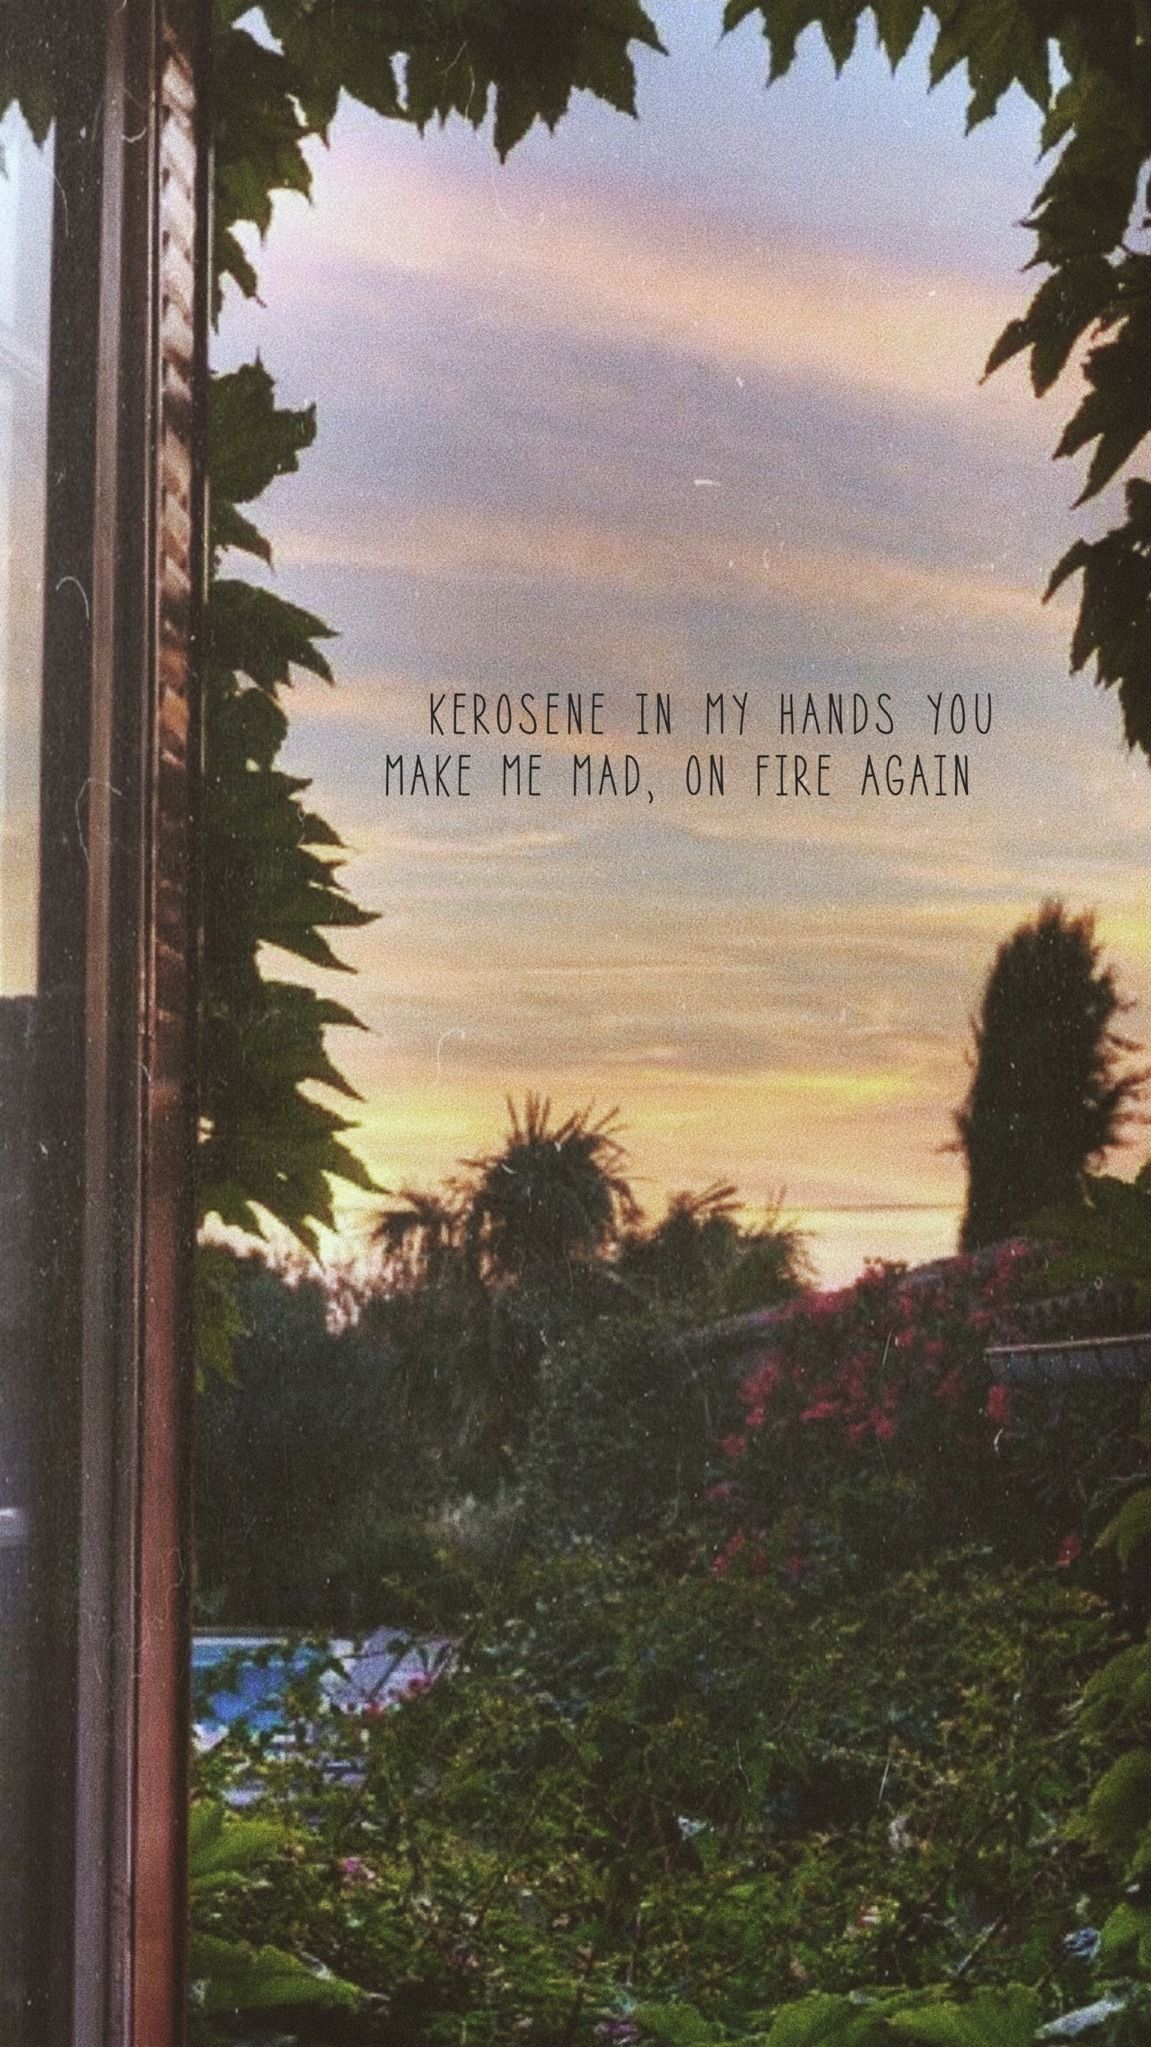 A painting of a sunset with a quote about kerosene. - Lana Del Rey